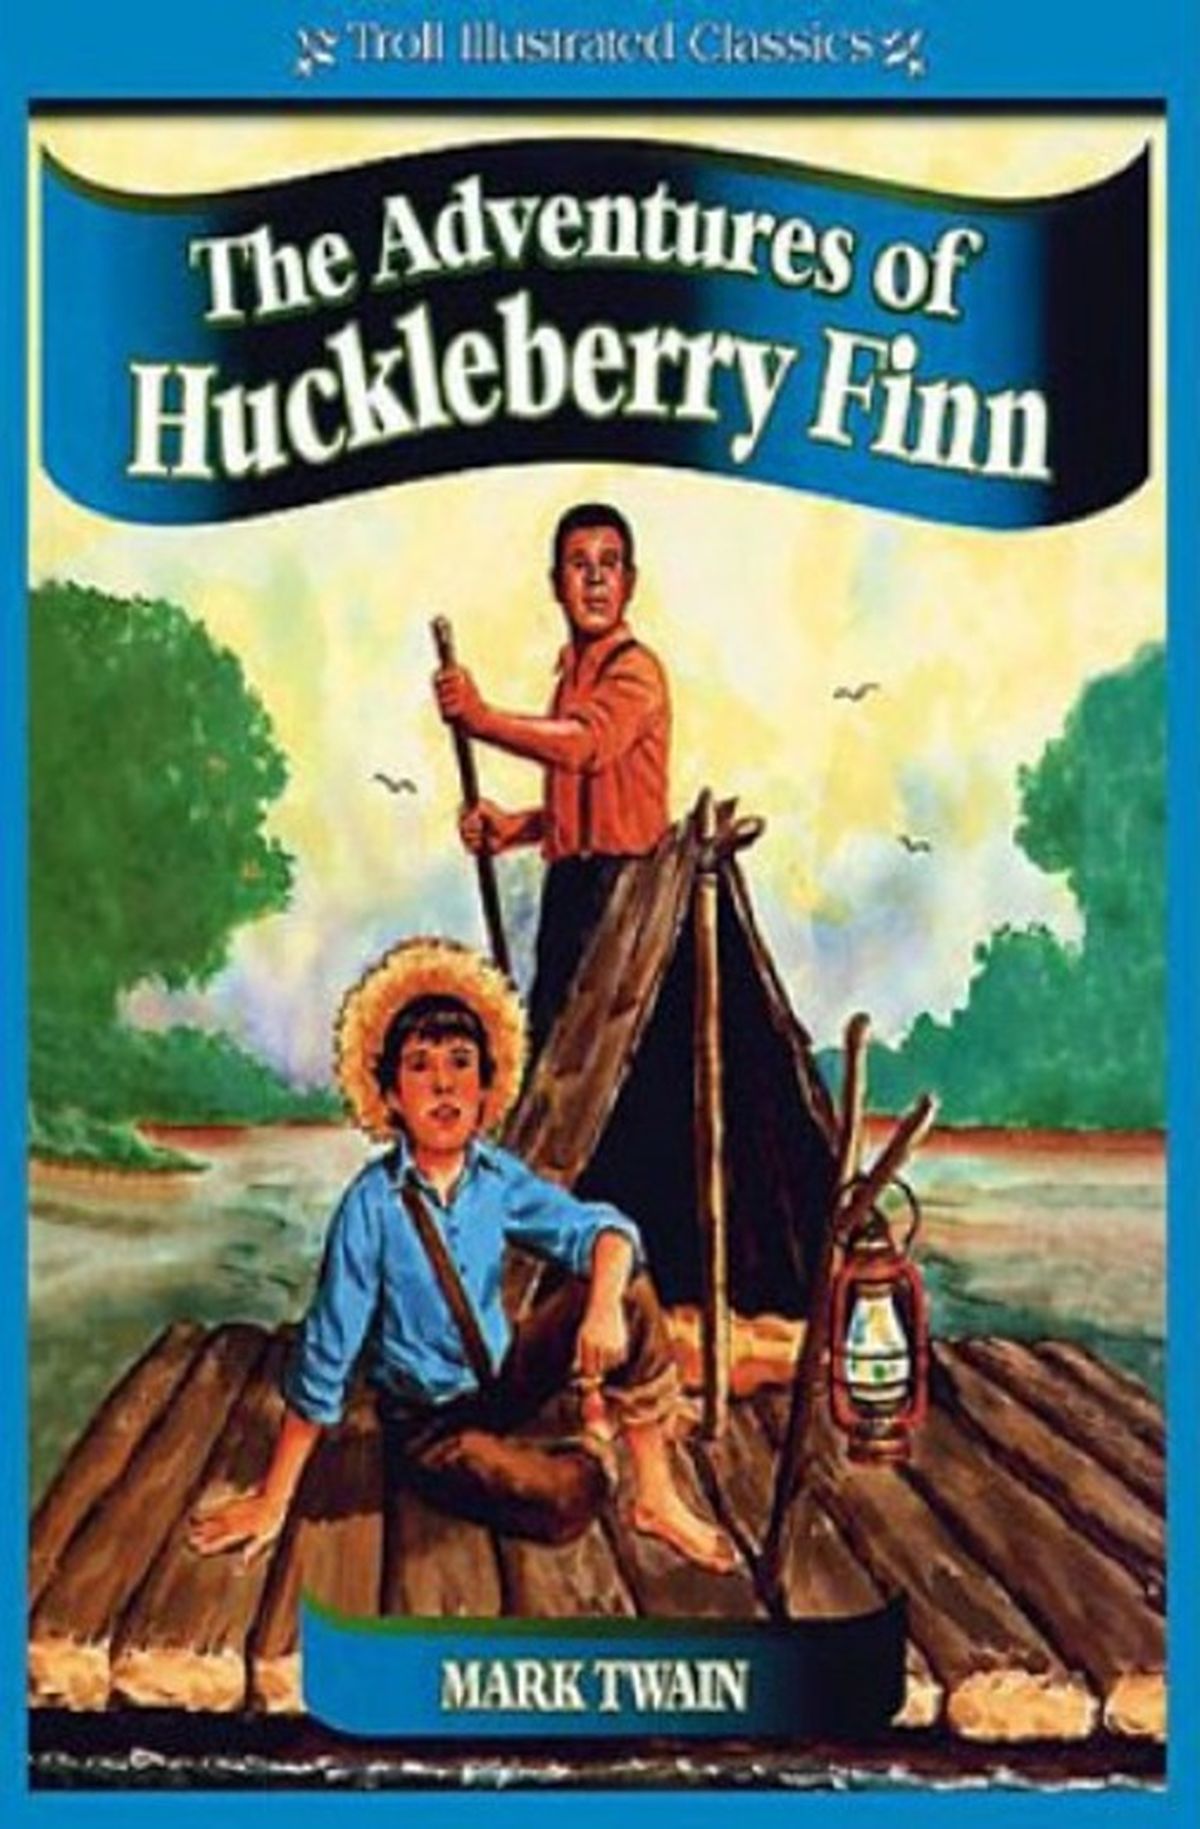 The Adventures of Huckleberry Finn for mac download free